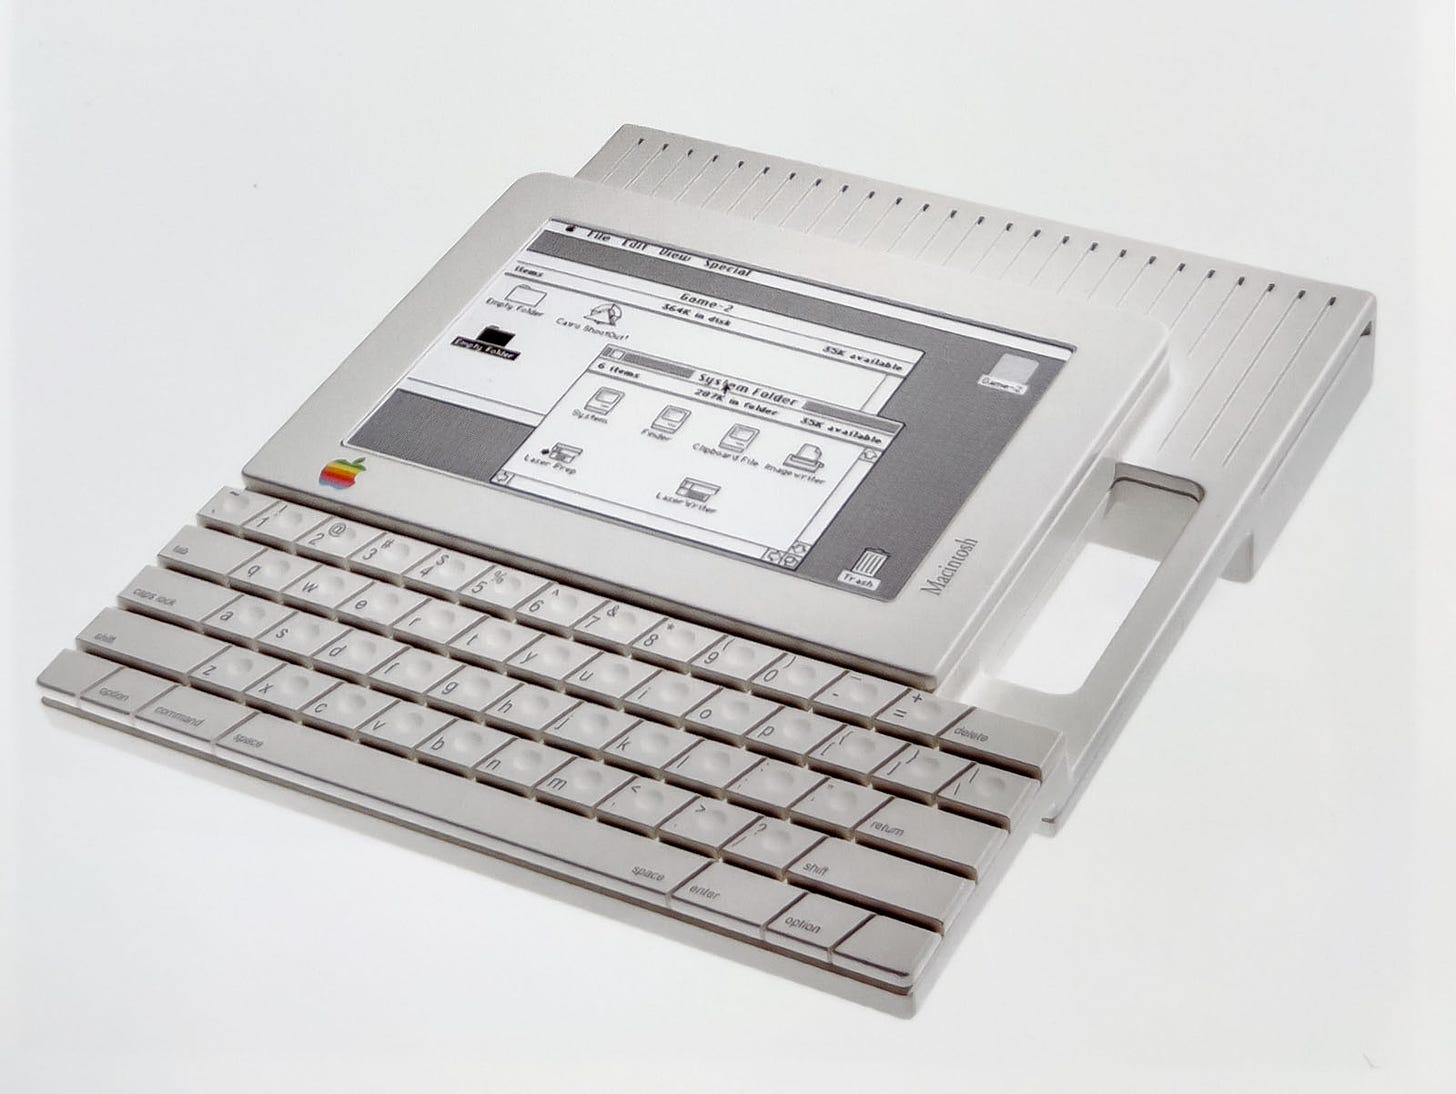 "BookMac"—an integrated portable with a central flat screen, attached keyboard and handle